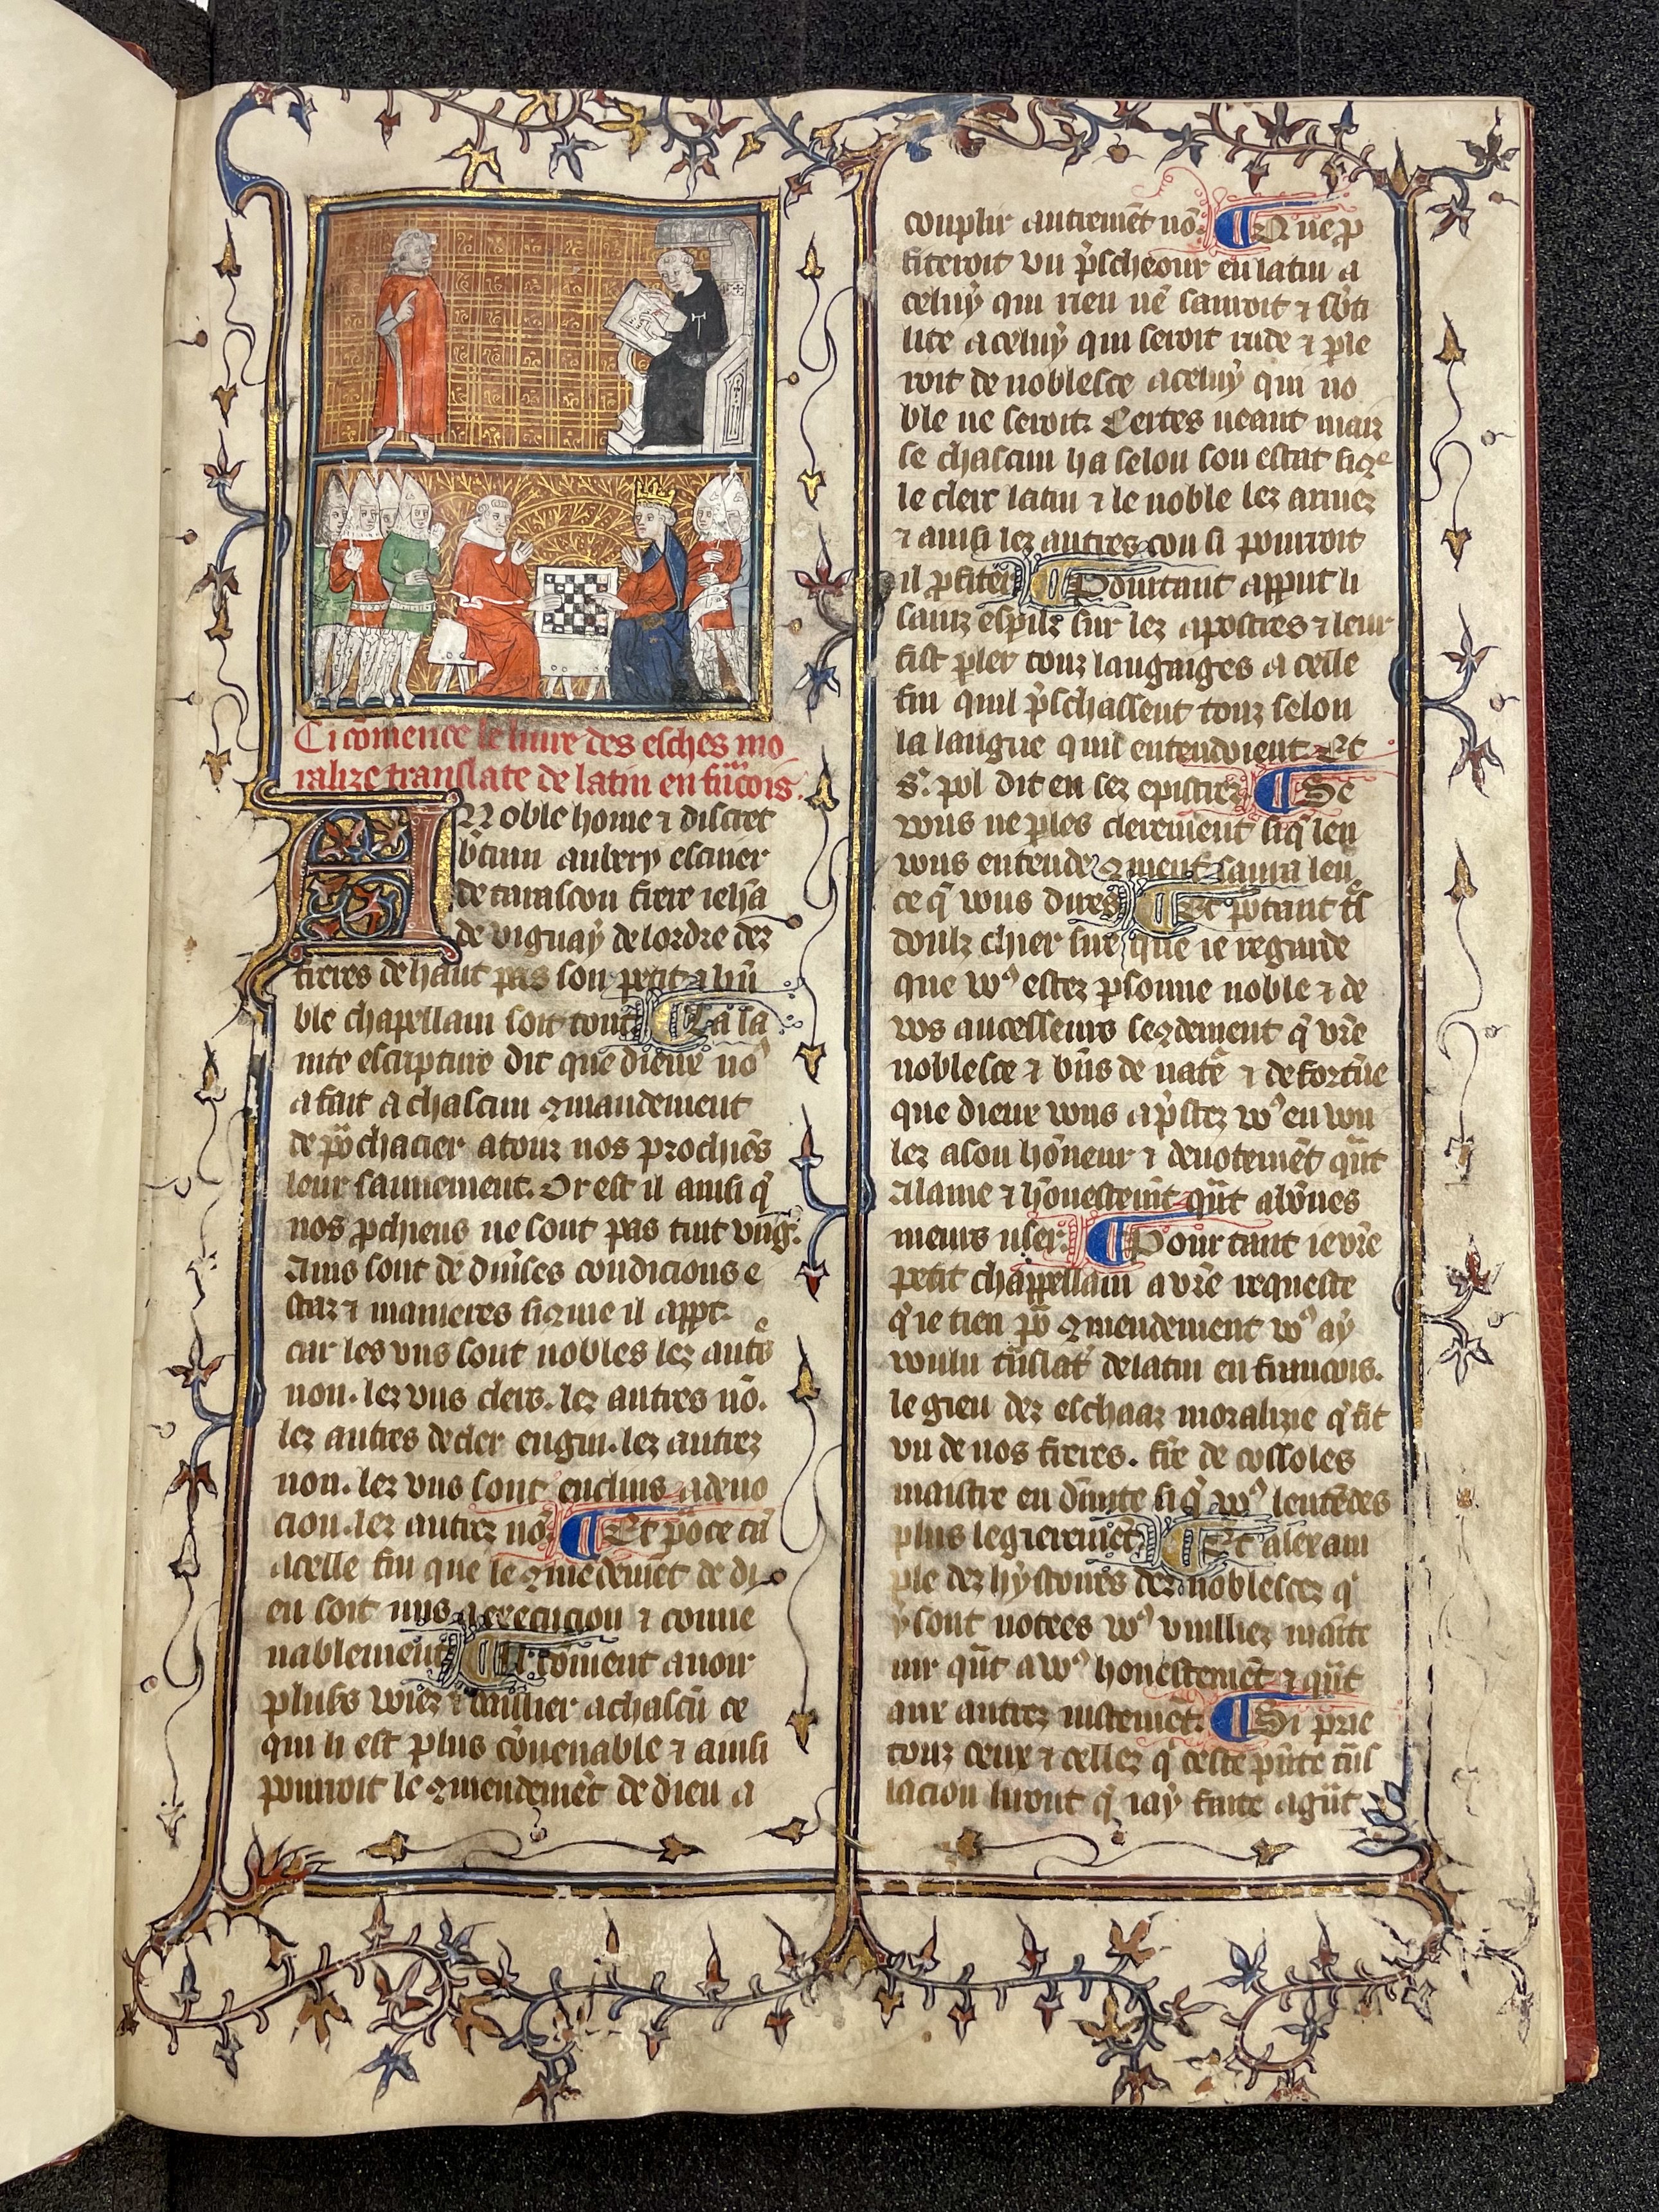 An illuminated manuscript with a small image of people playing chess.